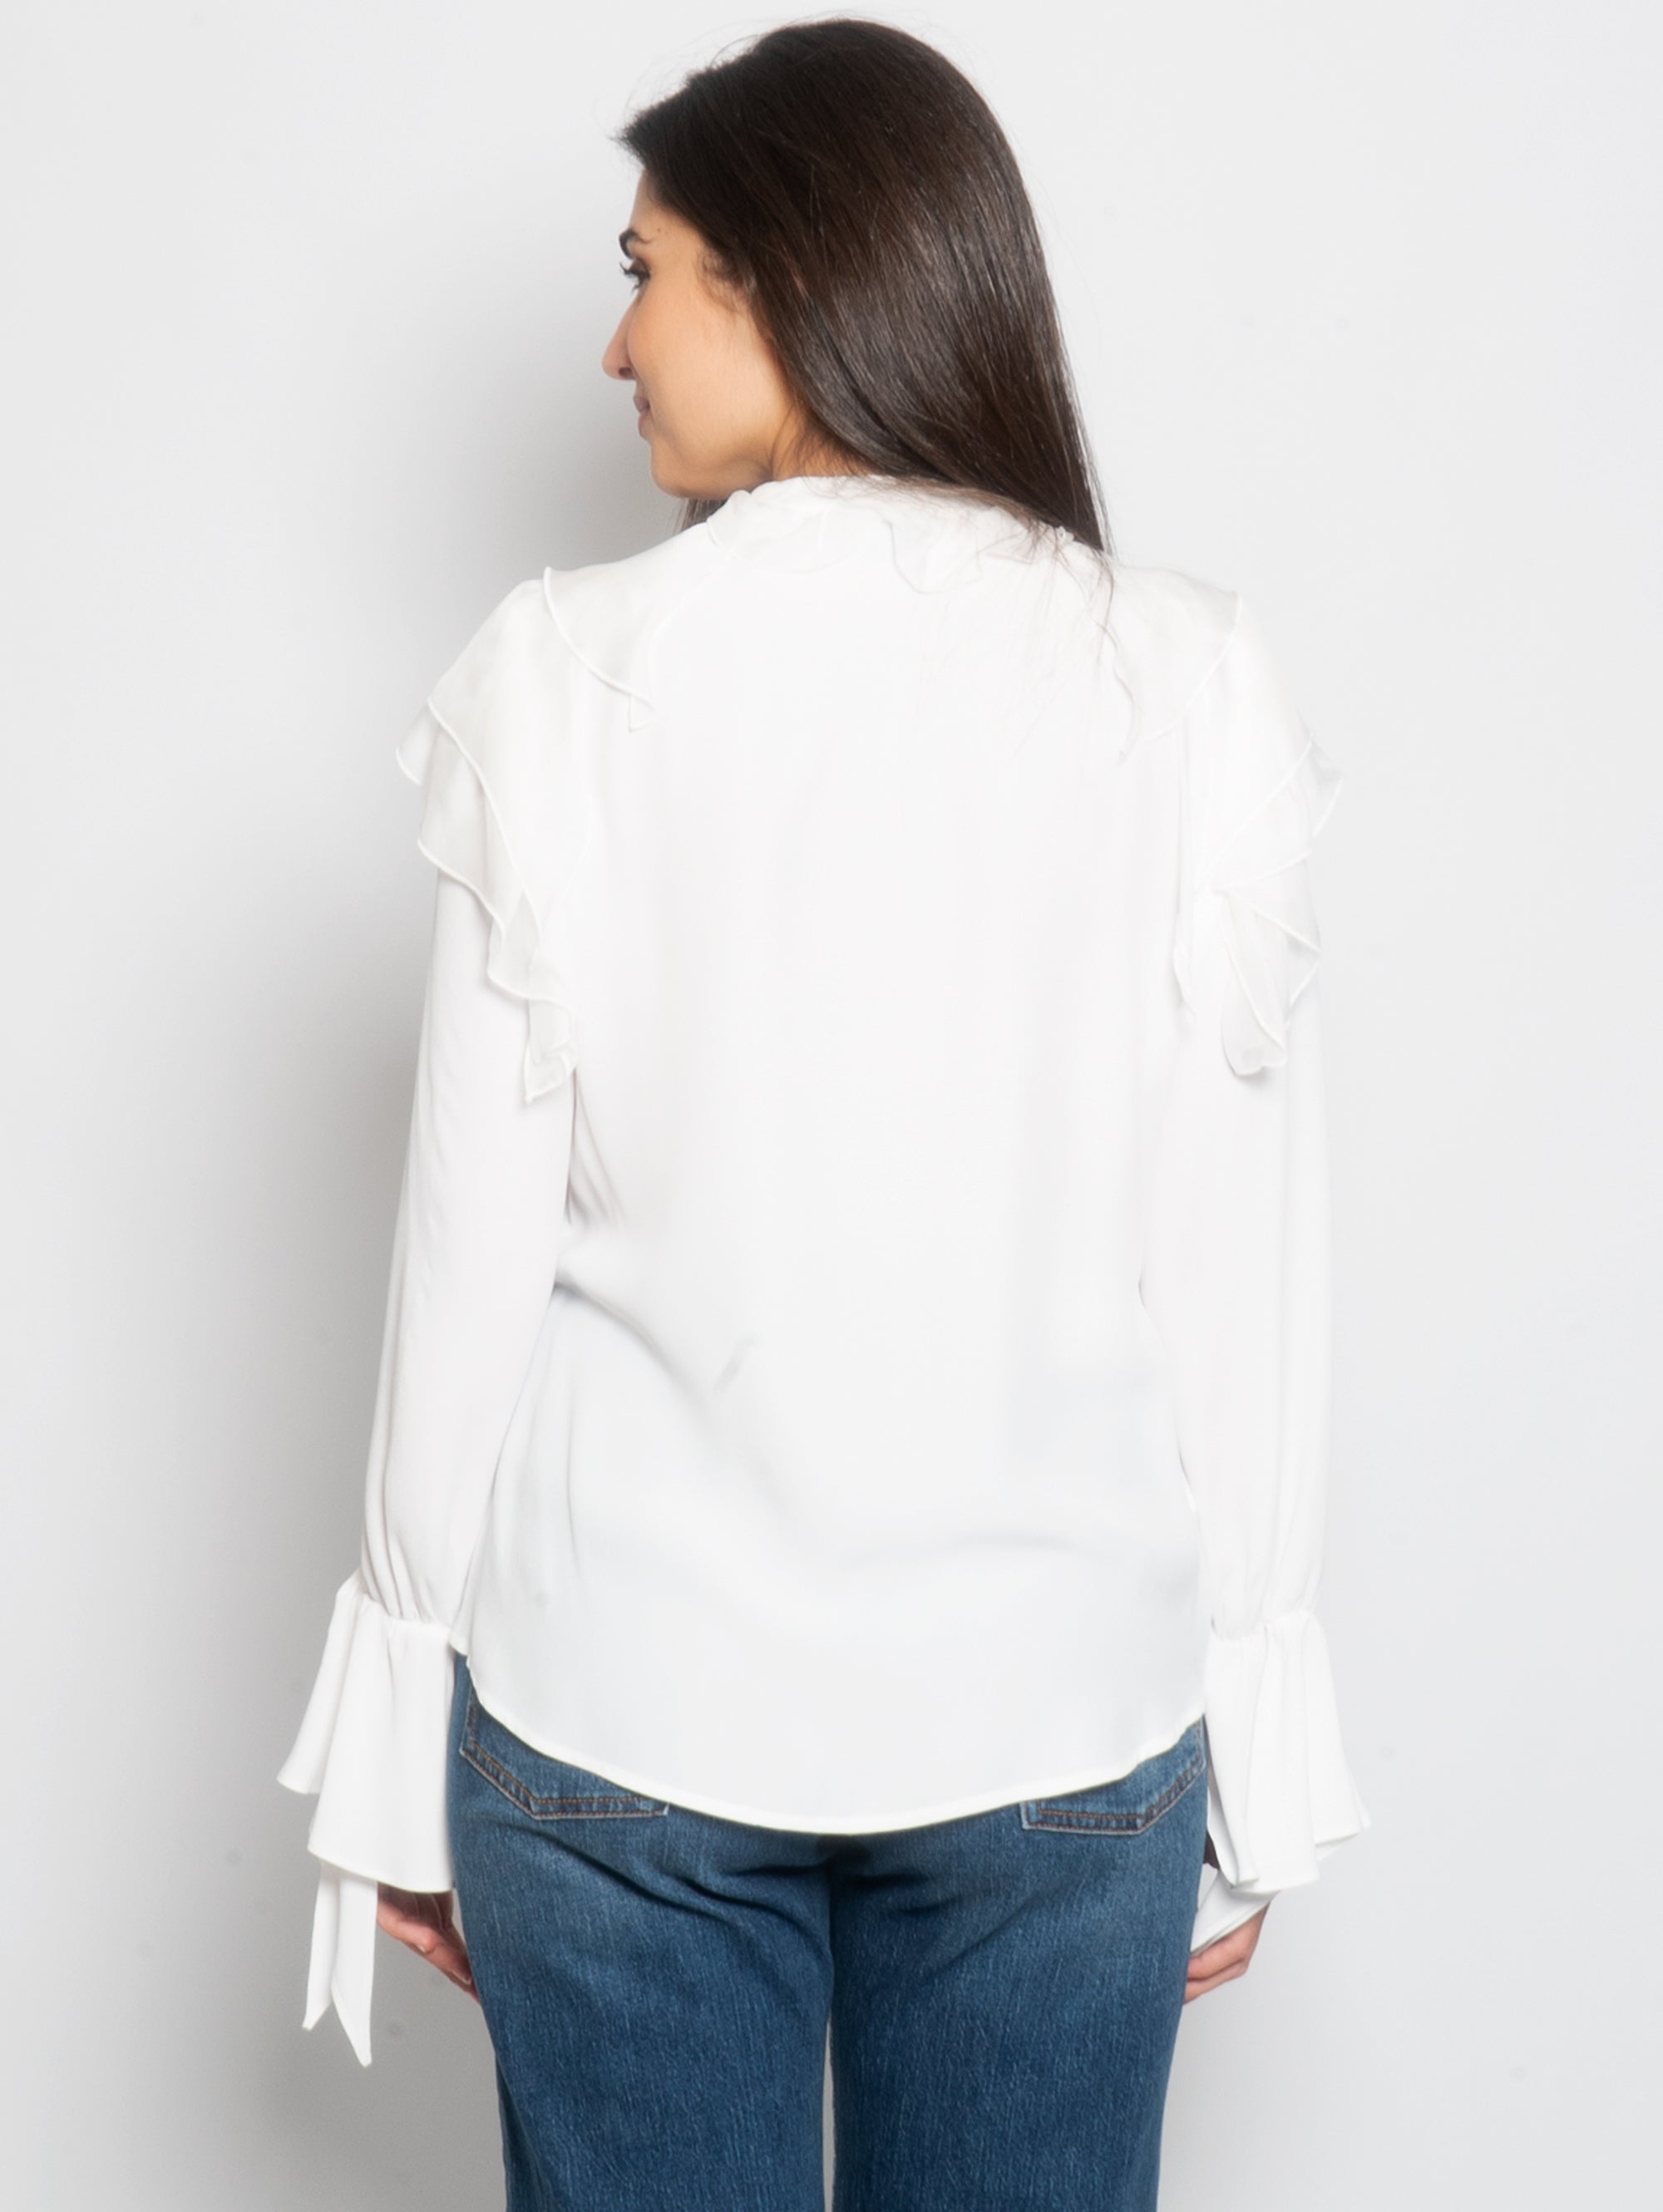 Blouse with Cascade of White Ruffles